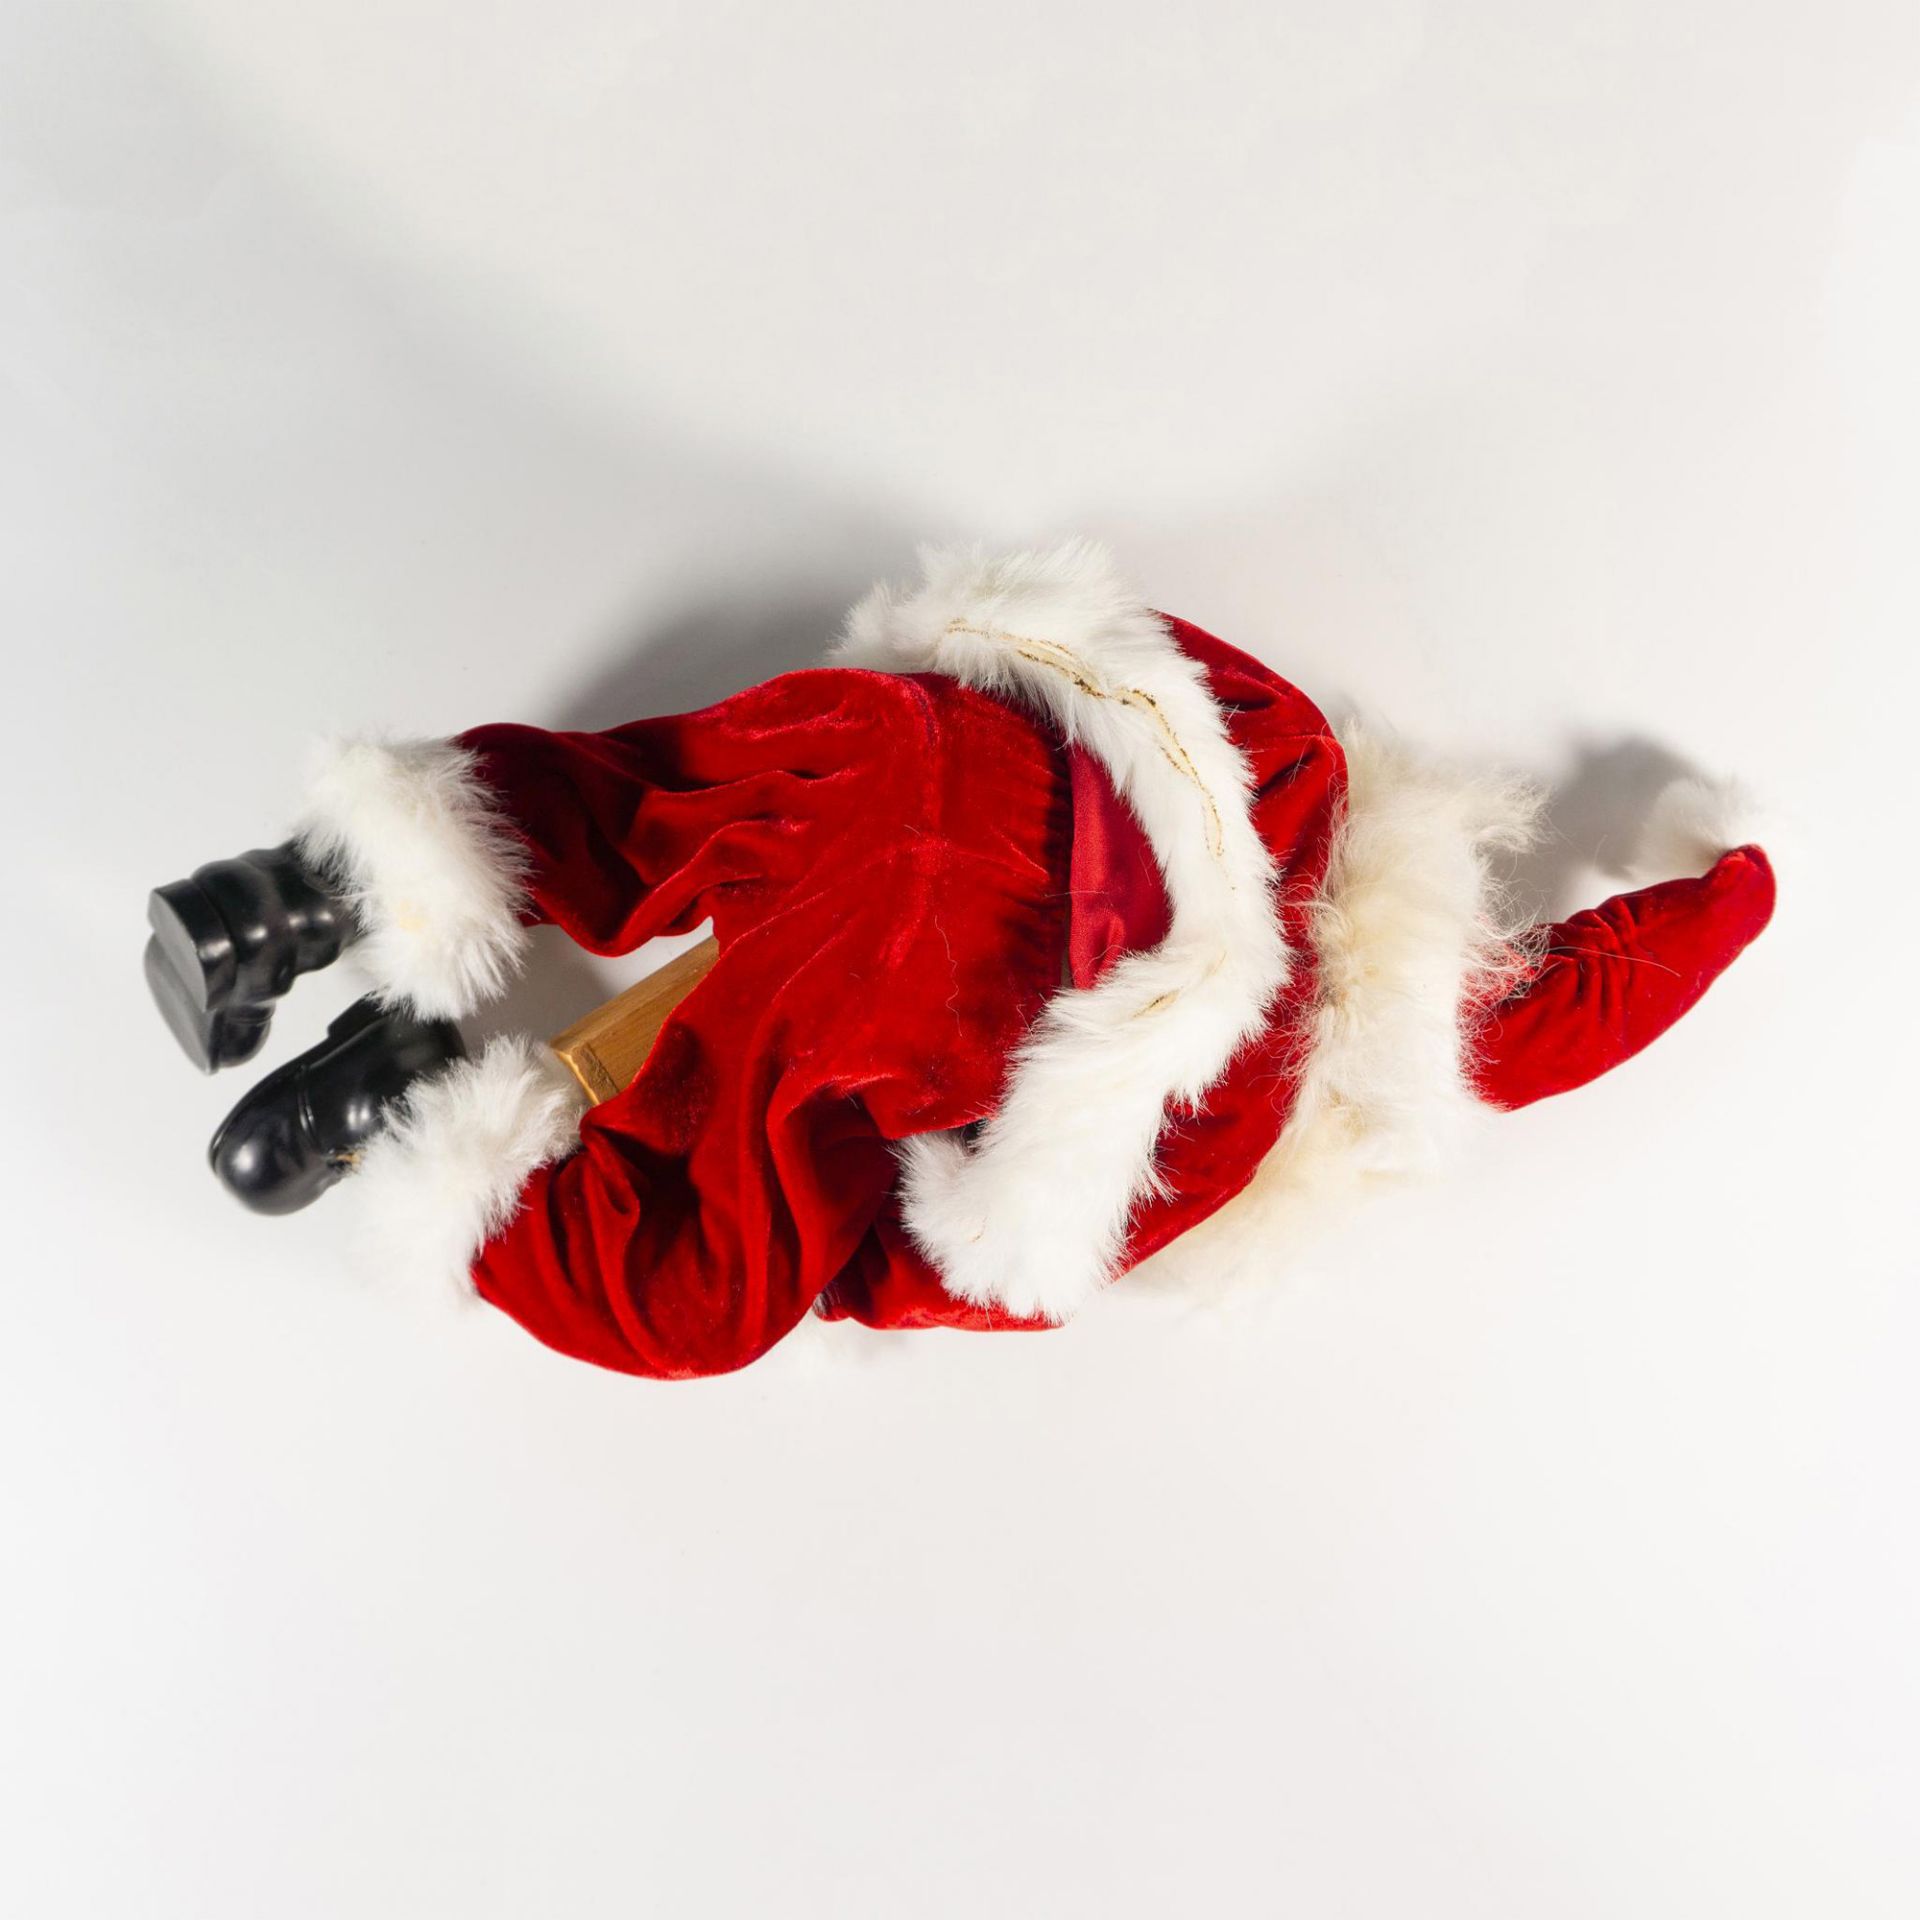 Sitting Santa, Waiting for the Time - Image 4 of 5